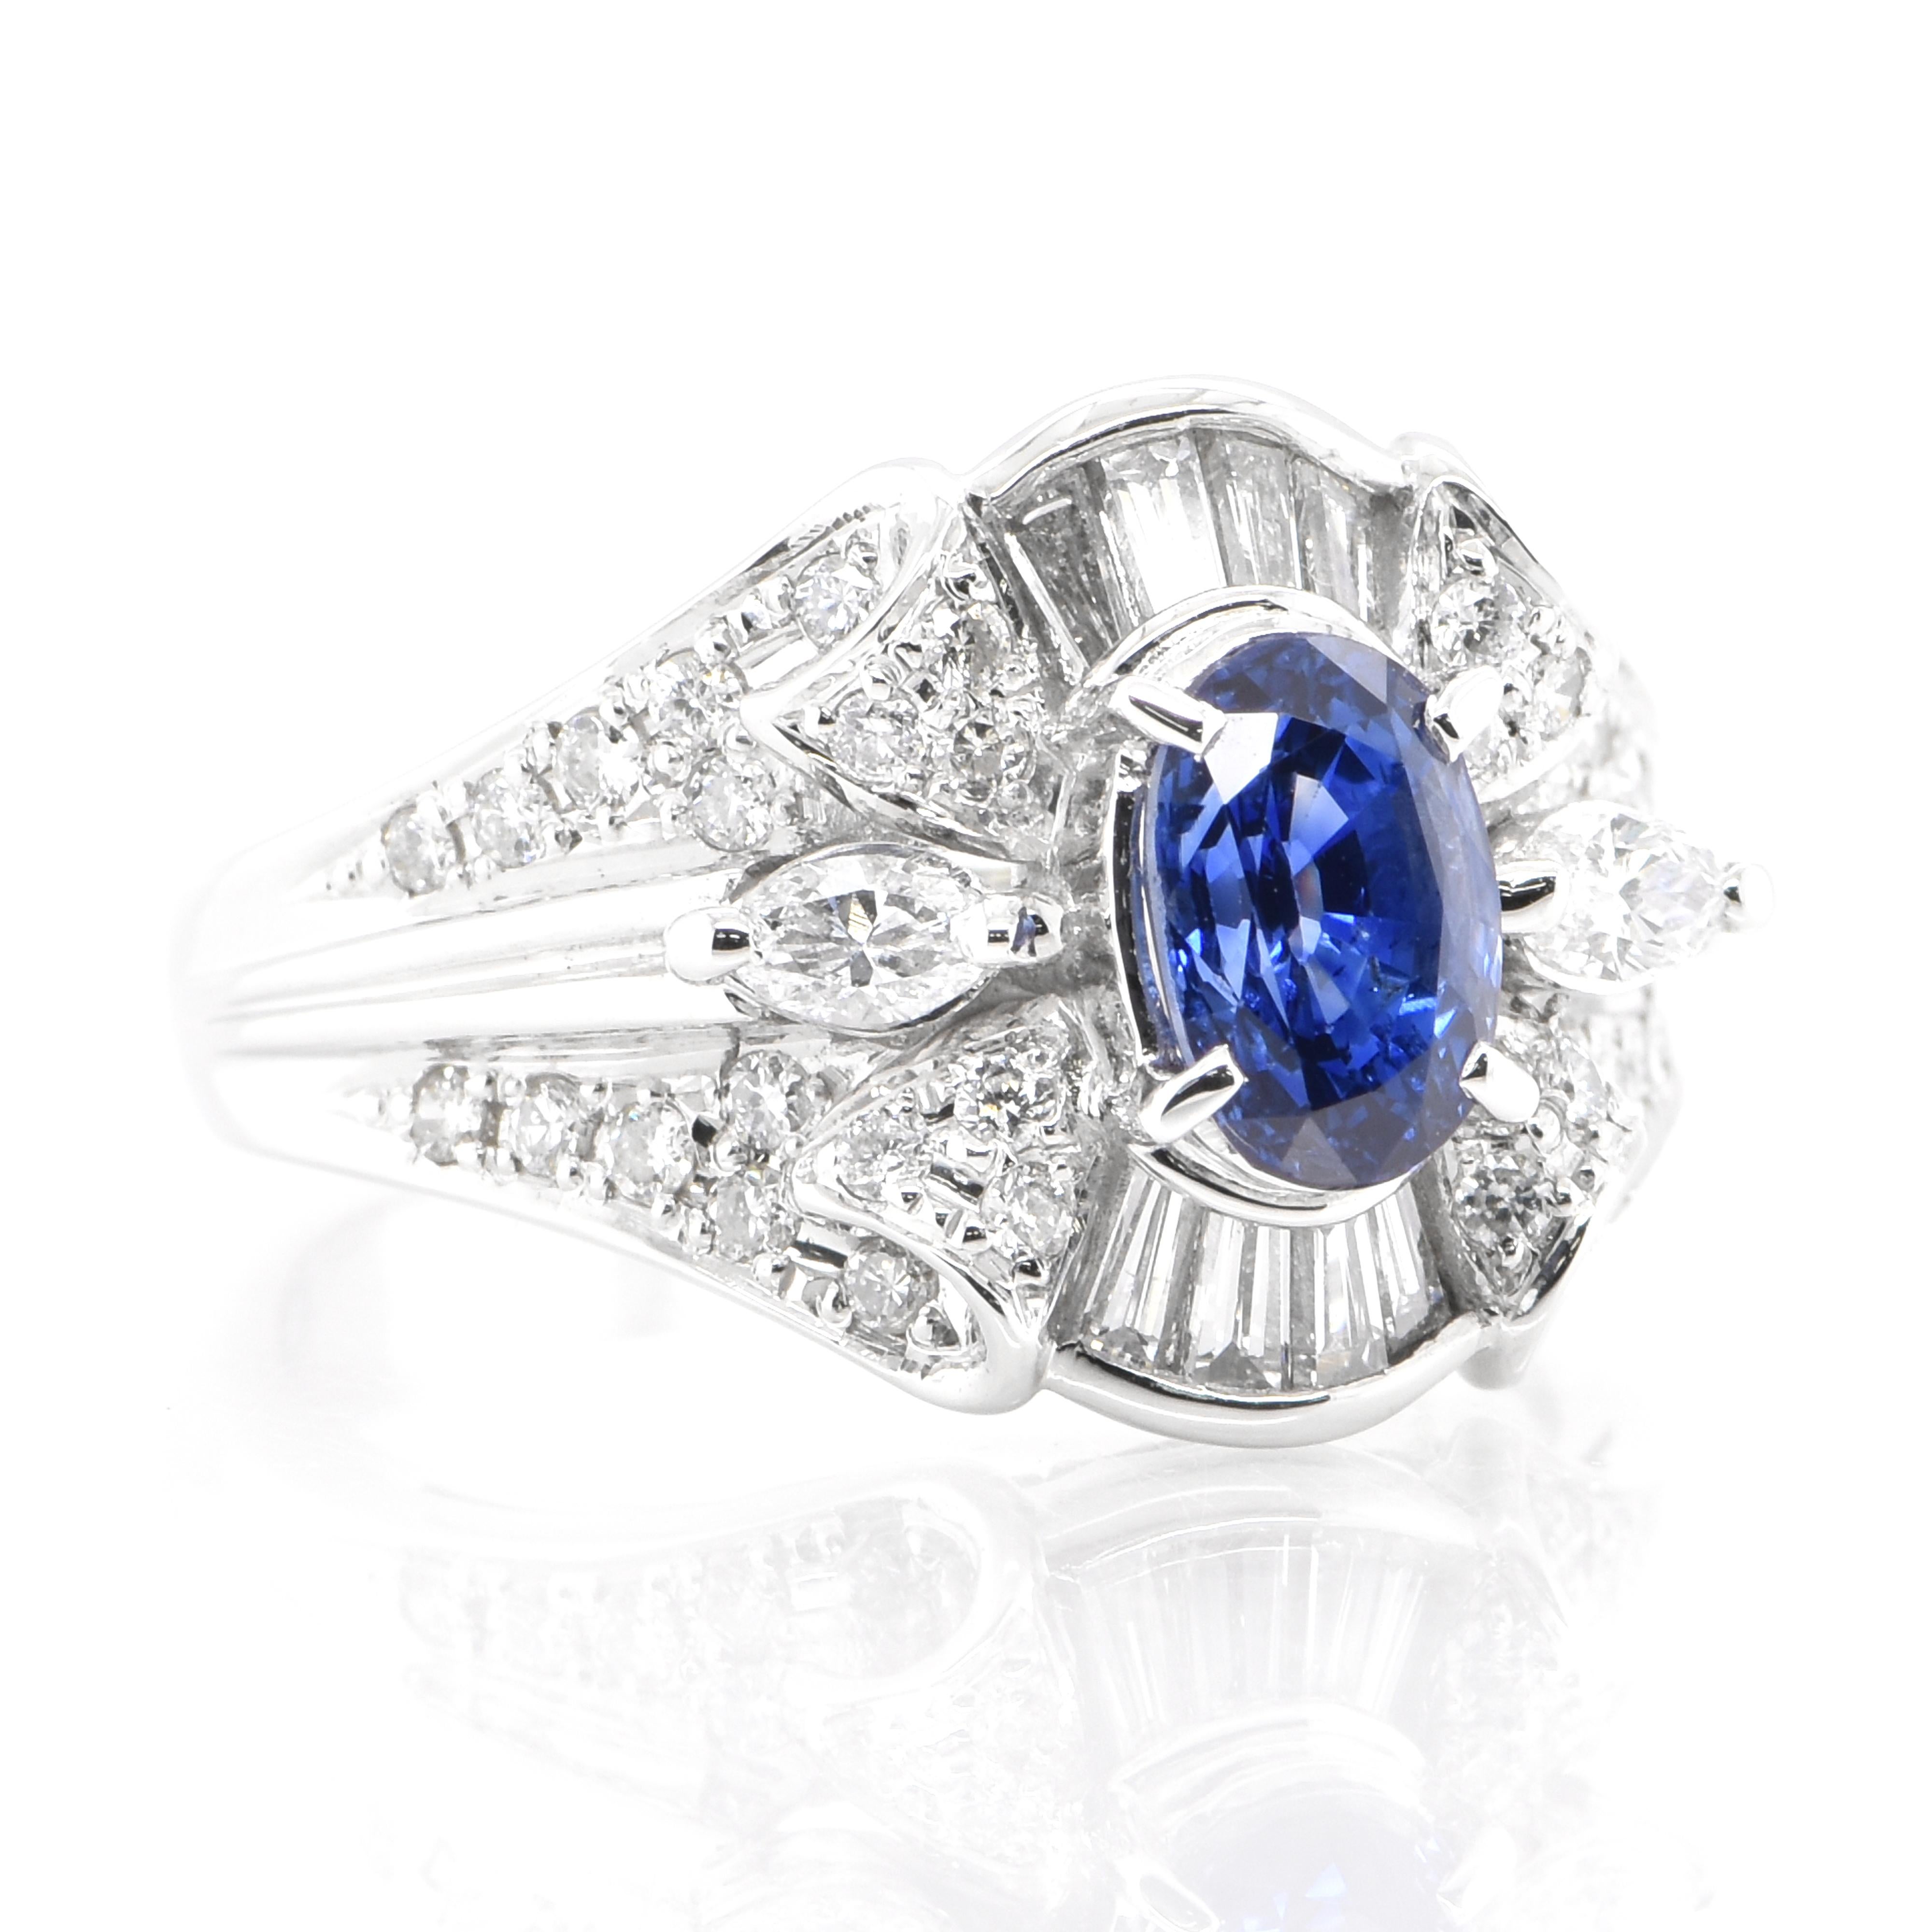 Modern Vintage 1.46 Carat Natural Blue Sapphire and Diamond Ring Made in Platinum For Sale